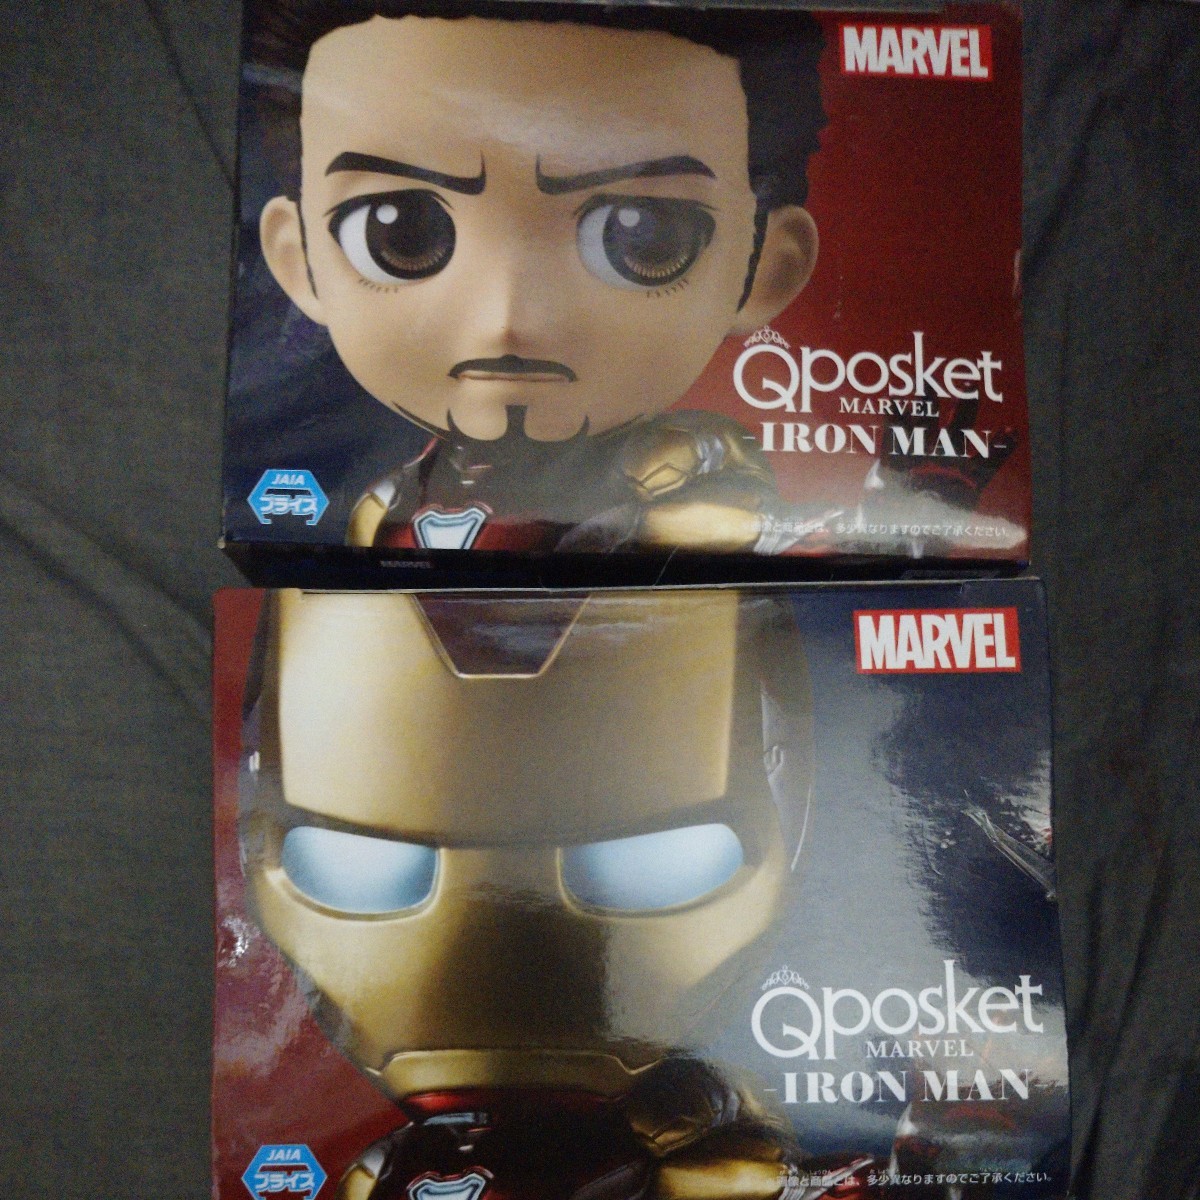 [ new goods * unopened ] Q posket Qposket MARVEL IRON MAN Ironman figure A mask & B mask none ver. / Tony * Star k